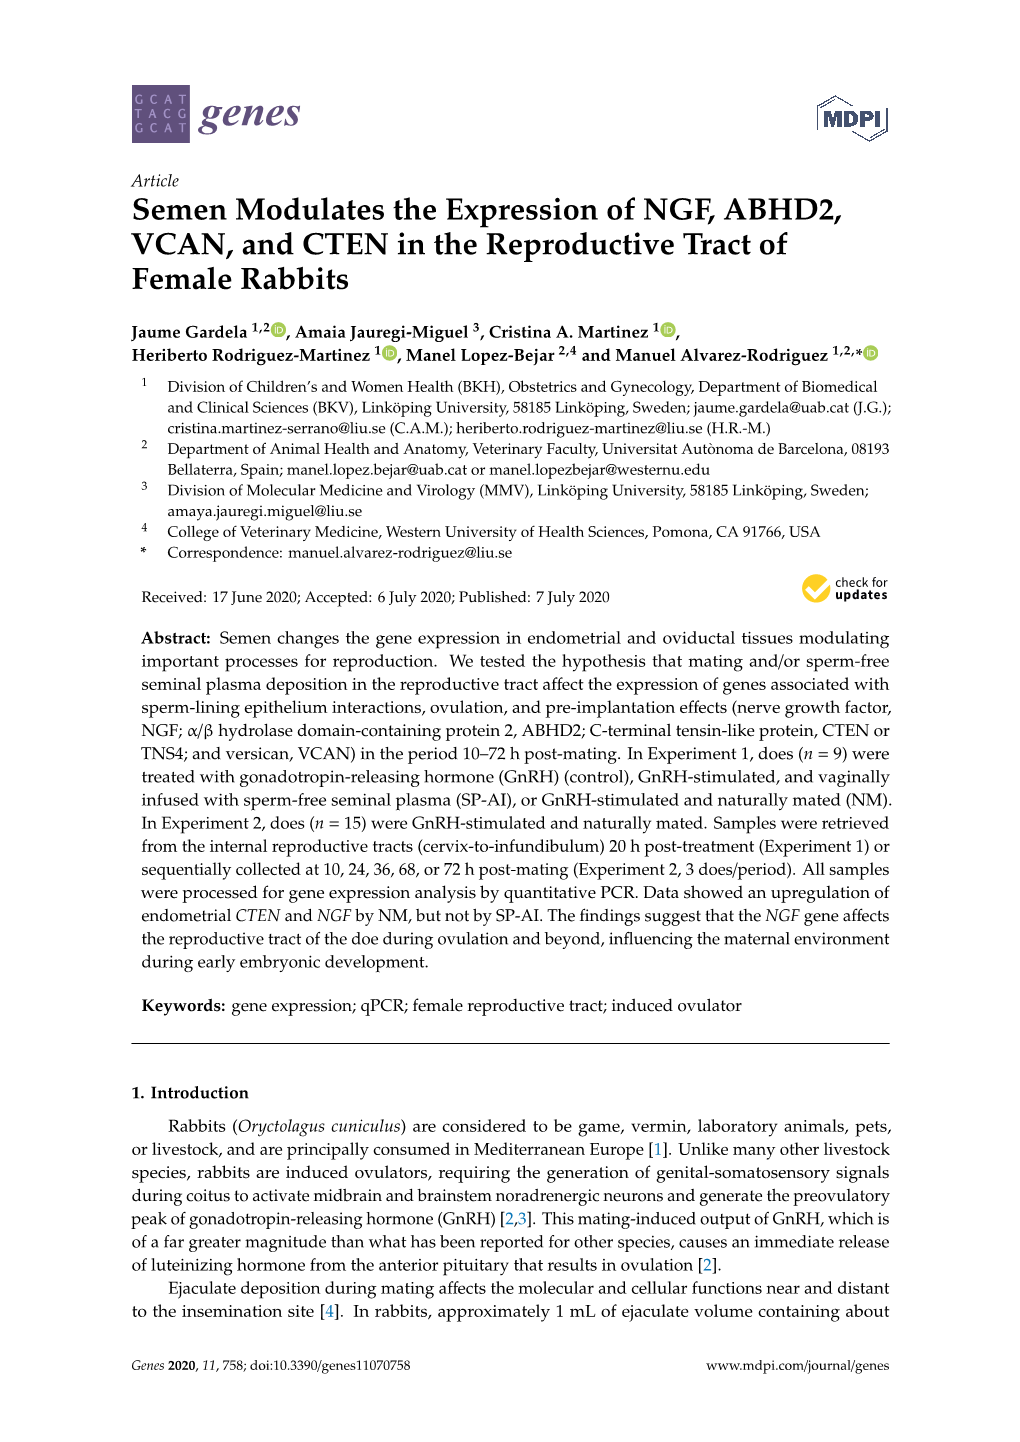 Semen Modulates the Expression of NGF, ABHD2, VCAN, and CTEN in the Reproductive Tract of Female Rabbits